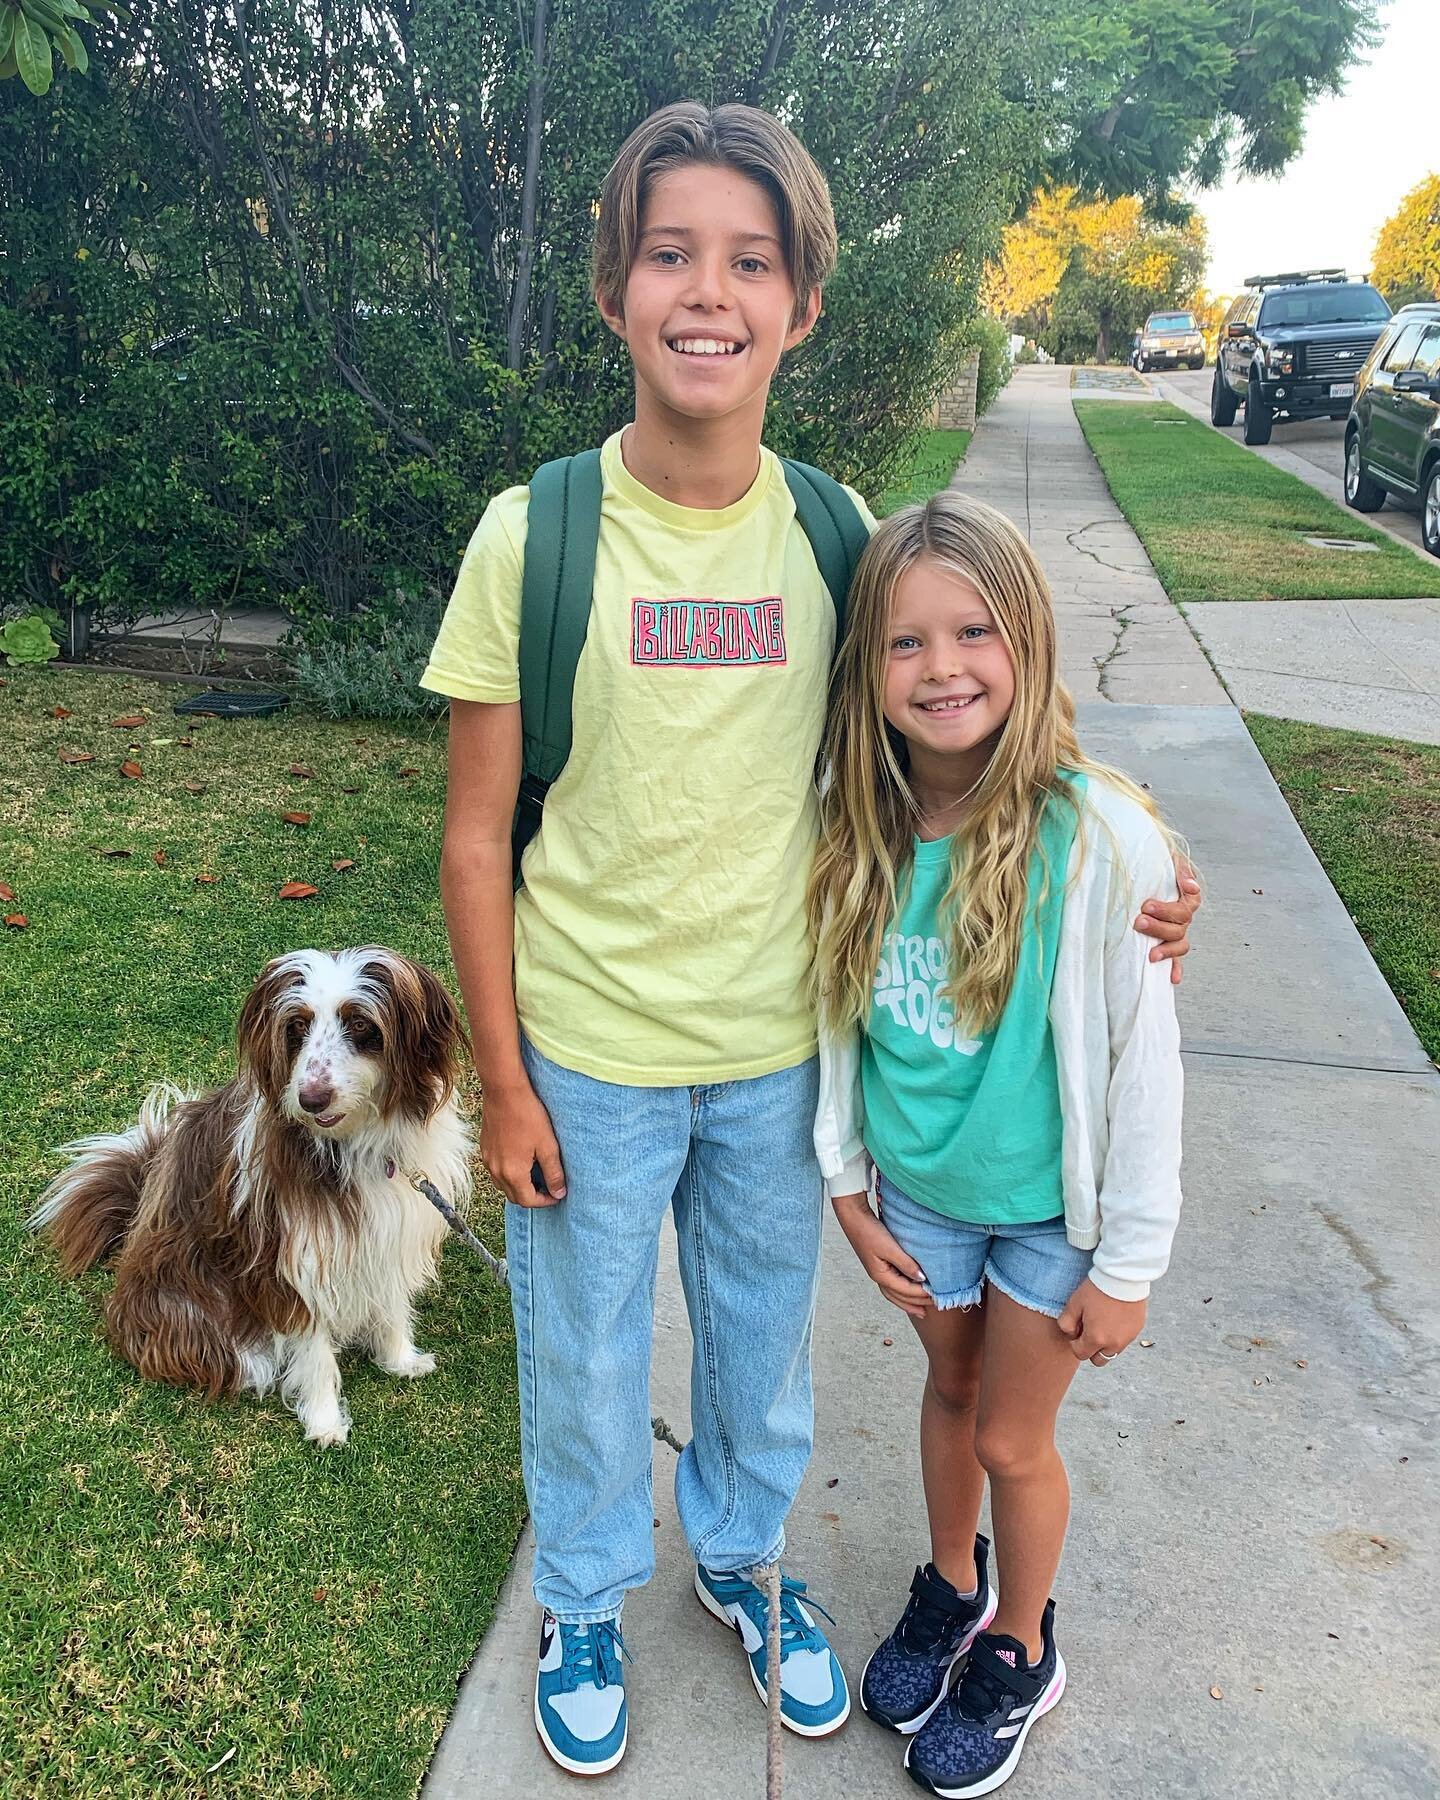 7th and 2nd grade here they come 💛💚Can&rsquo;t believe it&rsquo;s the first day of school for these two! What a wonderful summer we have had now off to school they go🌟🌟

#backtoschool #7thand2ndgrade #heretheycome #growingupsofast #middleschool #